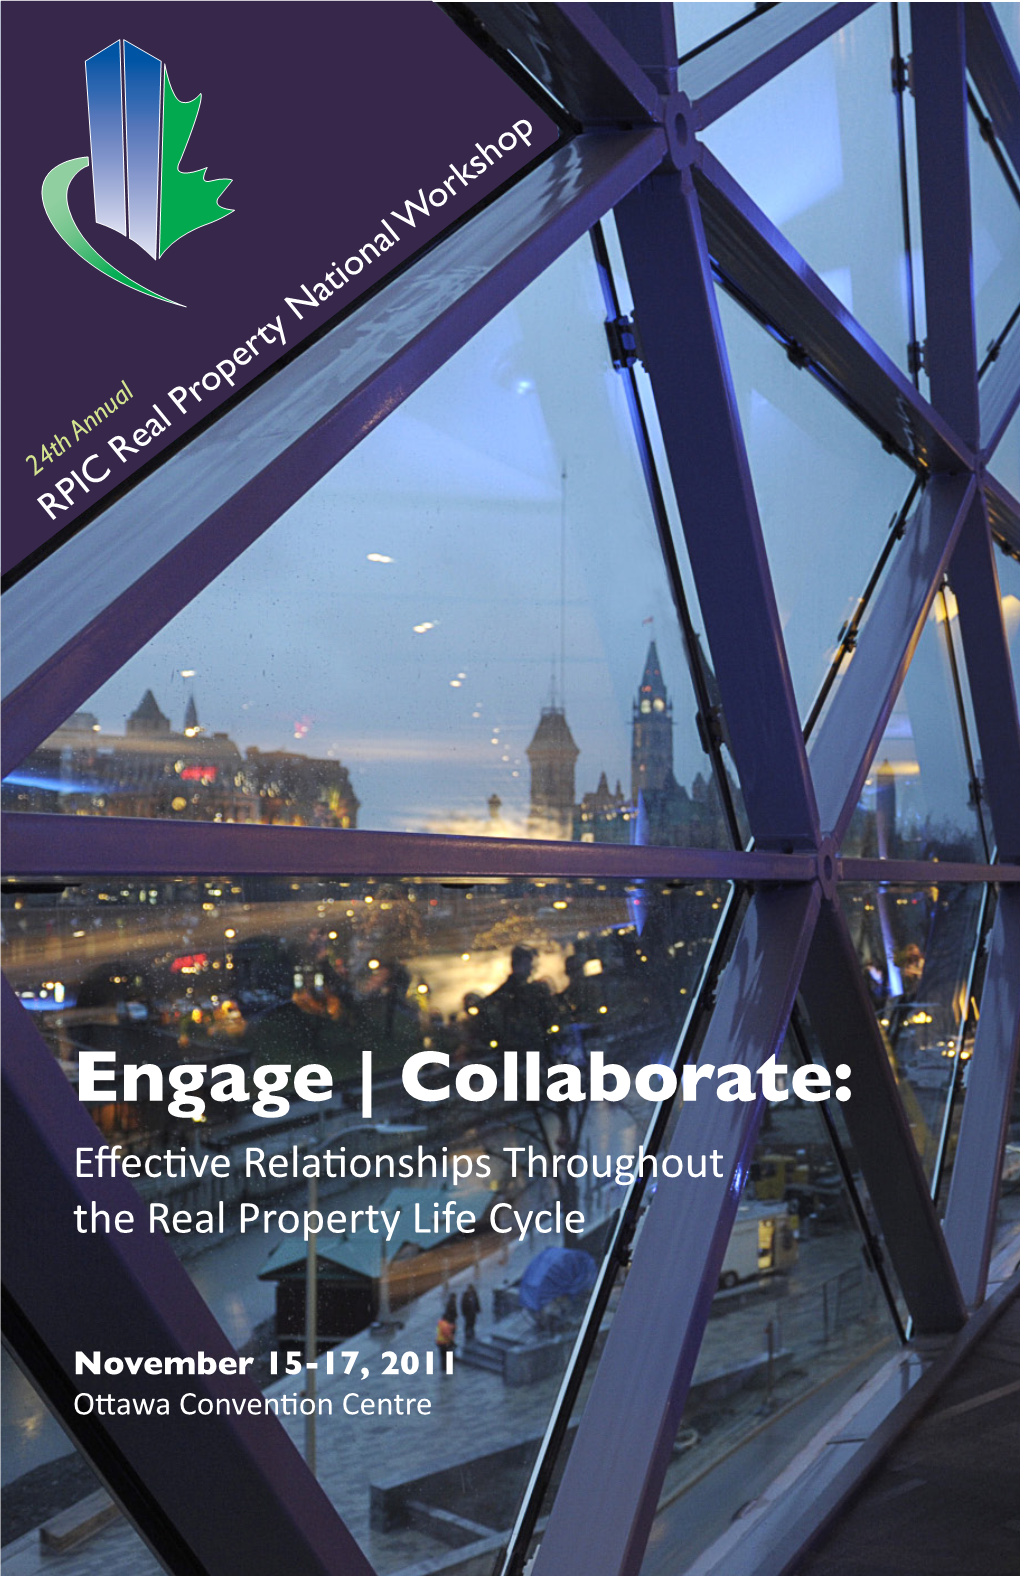 Engage | Collaborate: Effective Relationships Throughout the Real Property Life Cycle